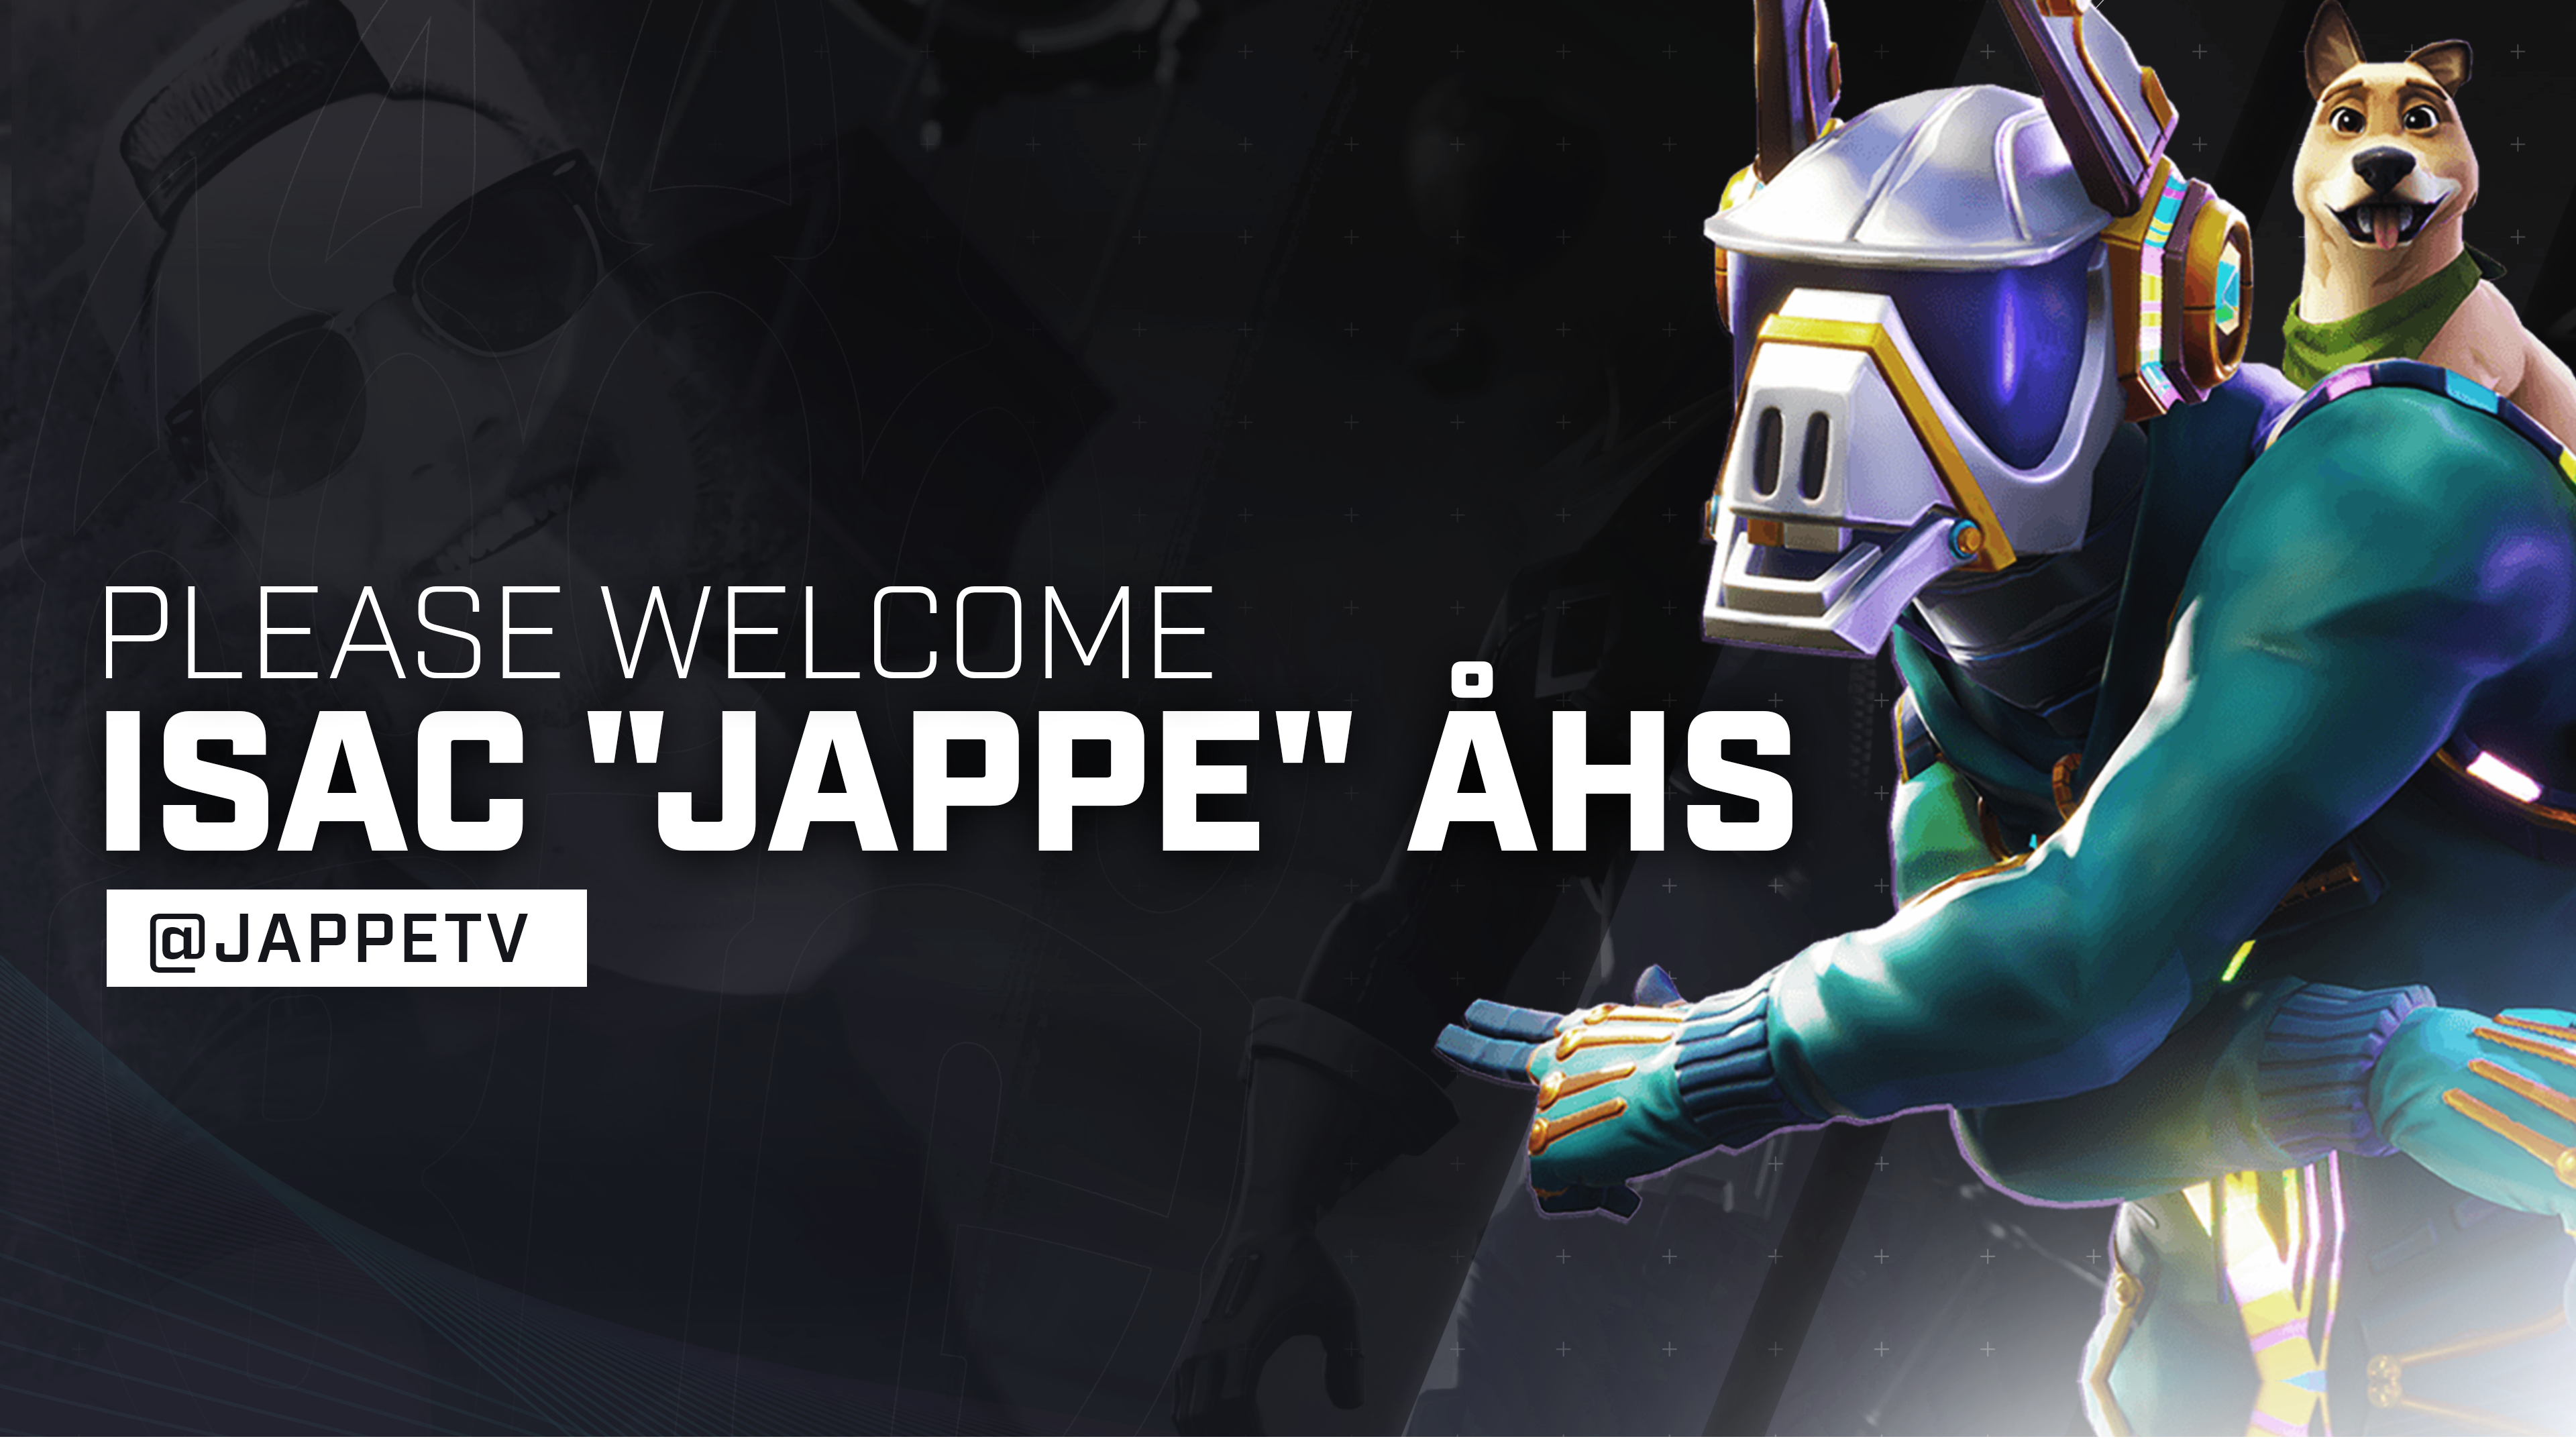 Big Expands In Fortnite With Isac Jappe Ahs Bigclan Gg - little over three months ago we made our first steps into the fortnite pro scene by signing daniel dominate garcia as our fortnite player and streamer